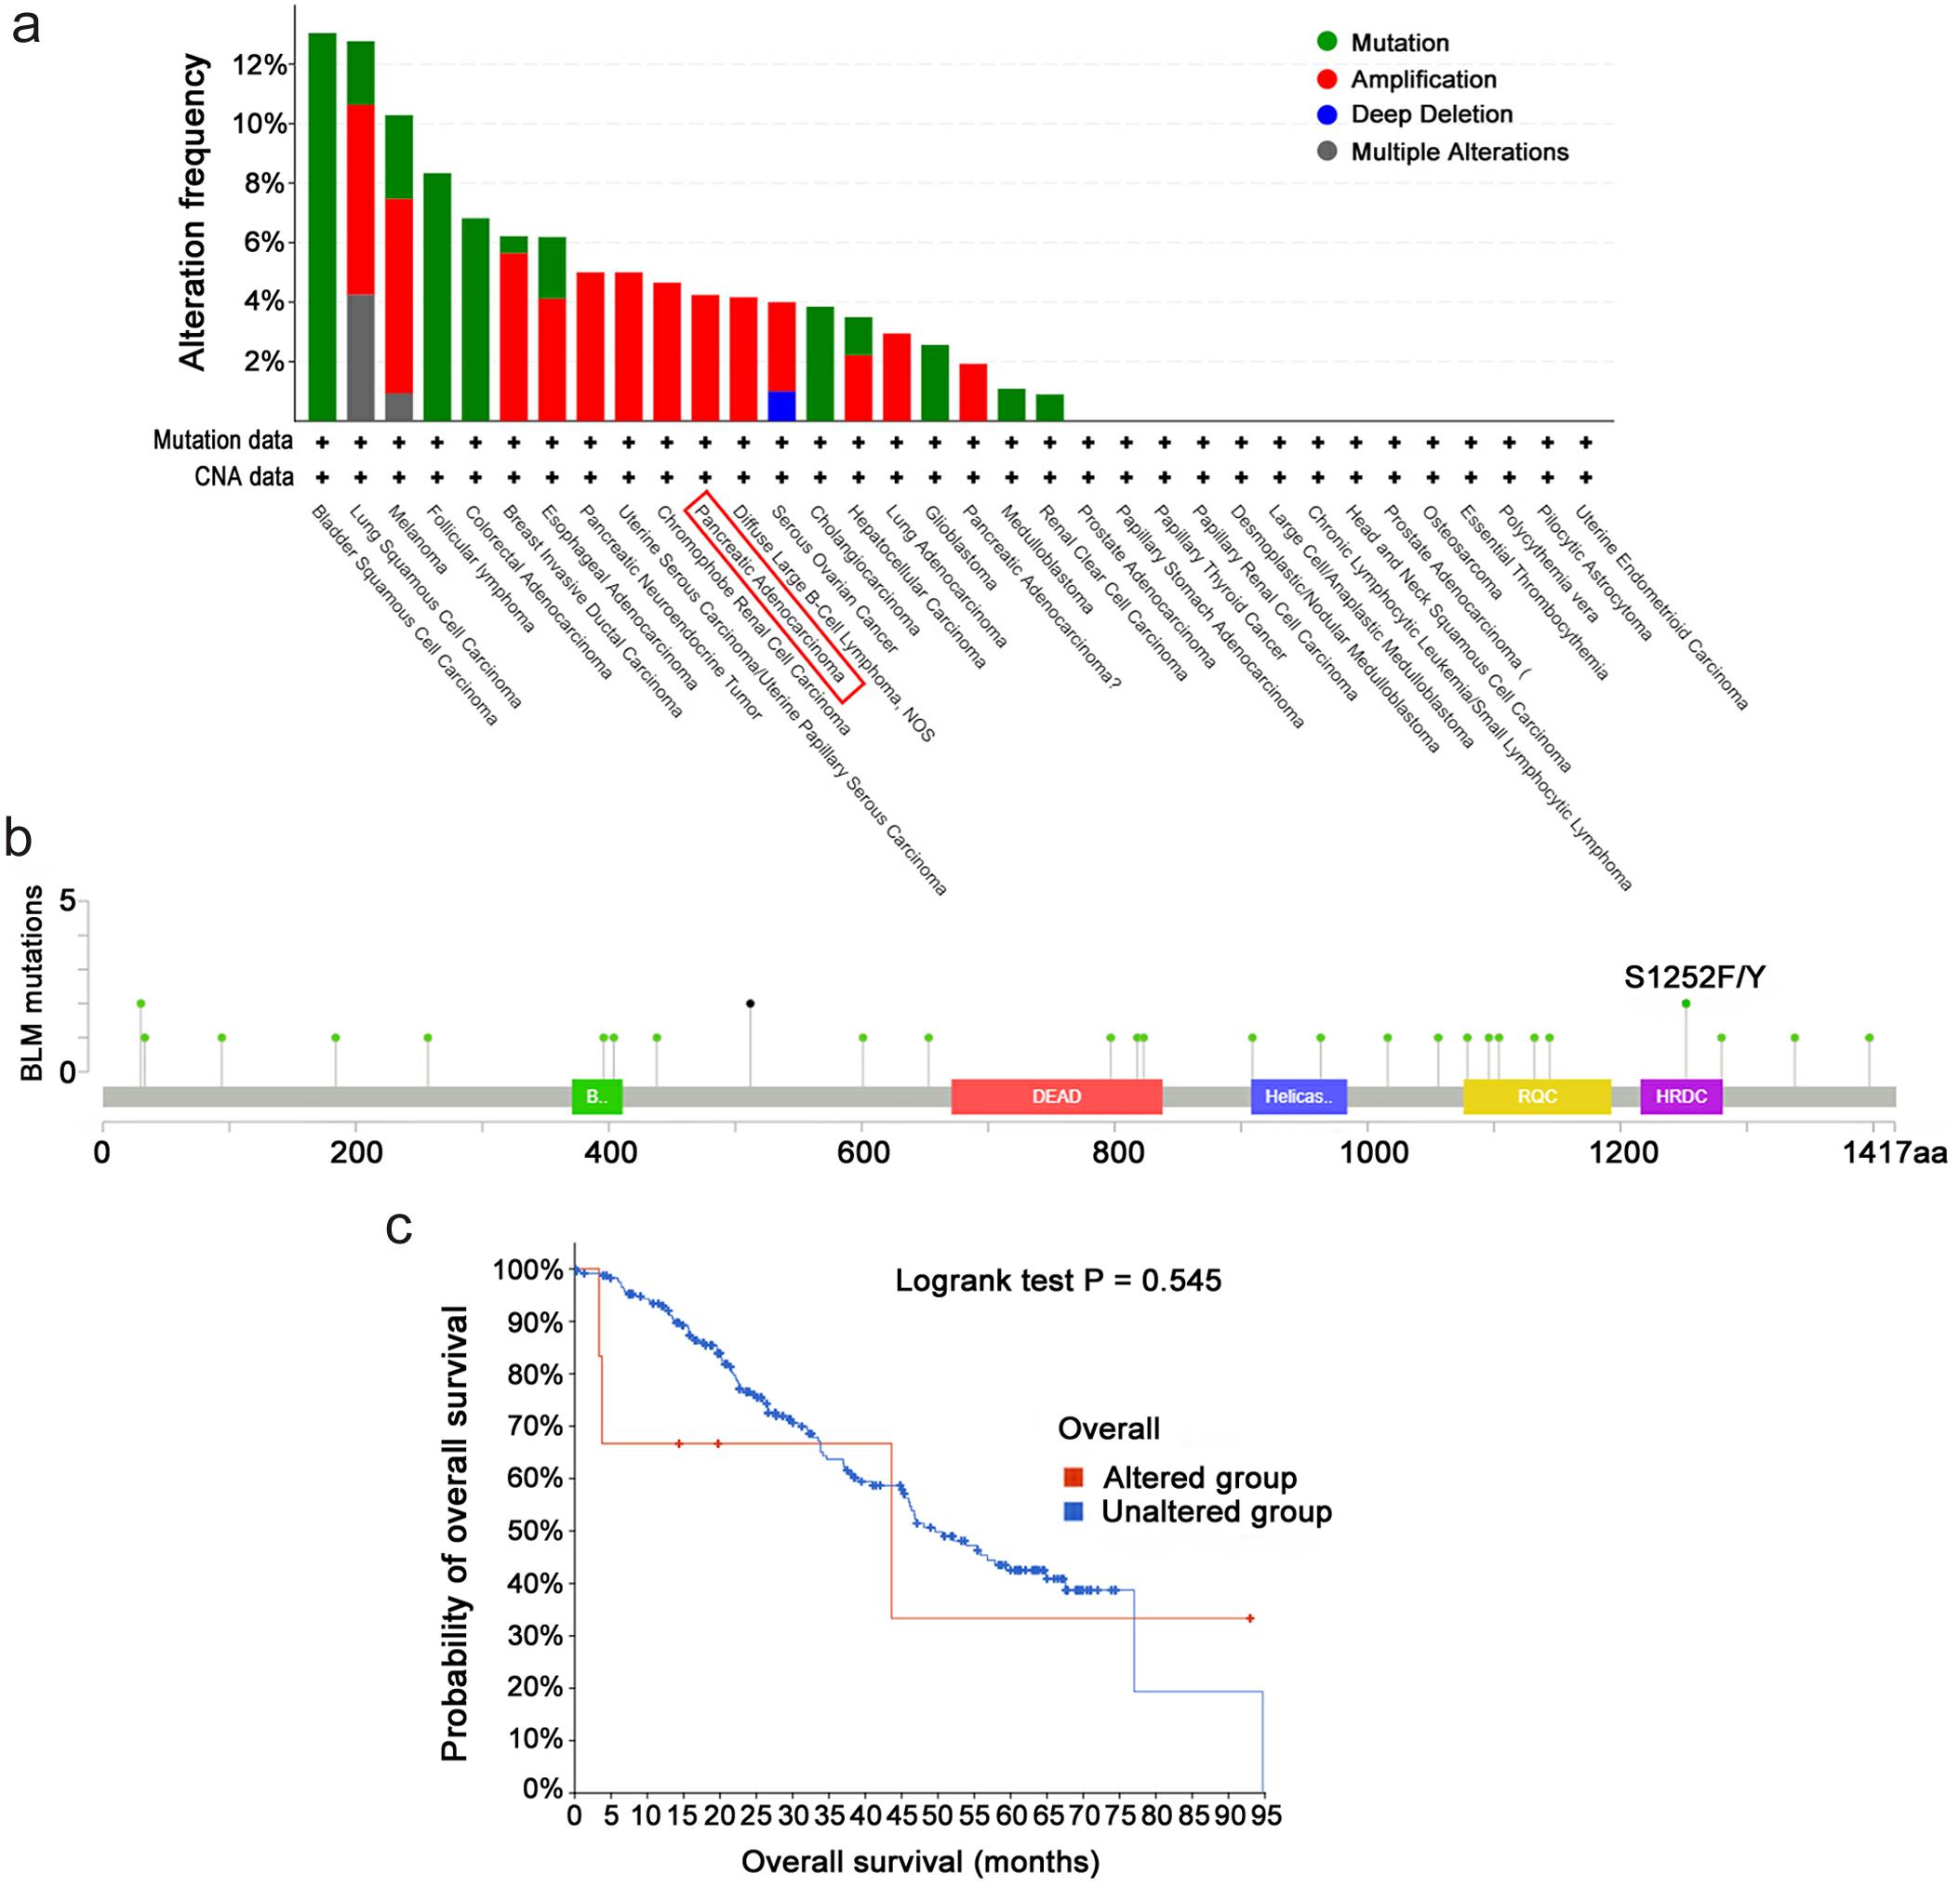 The BLM gene mutations and the prognosis analysis based on the cBioPortal web.